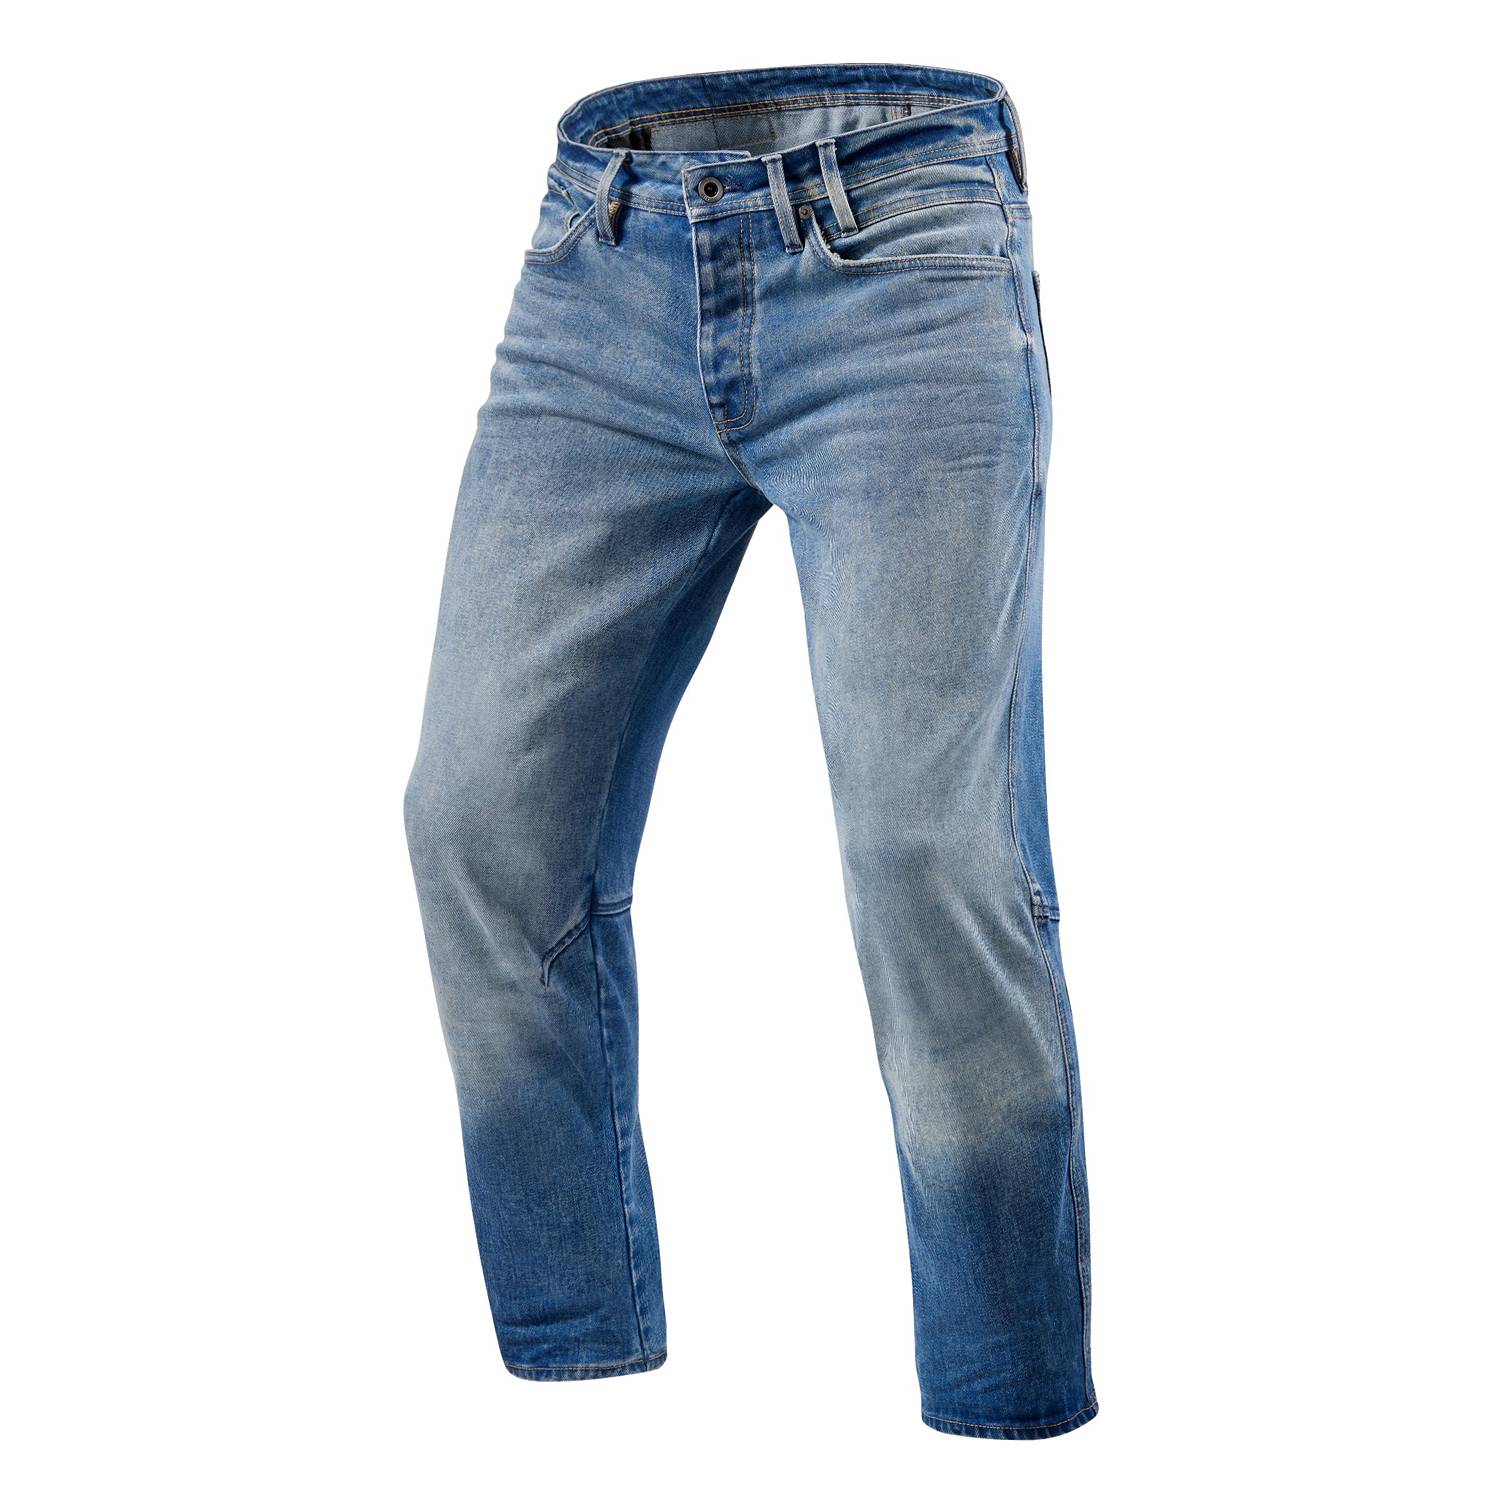 Image of REV'IT! Salt TF Mid Blue Used Motorcycle Jeans Talla L36/W32